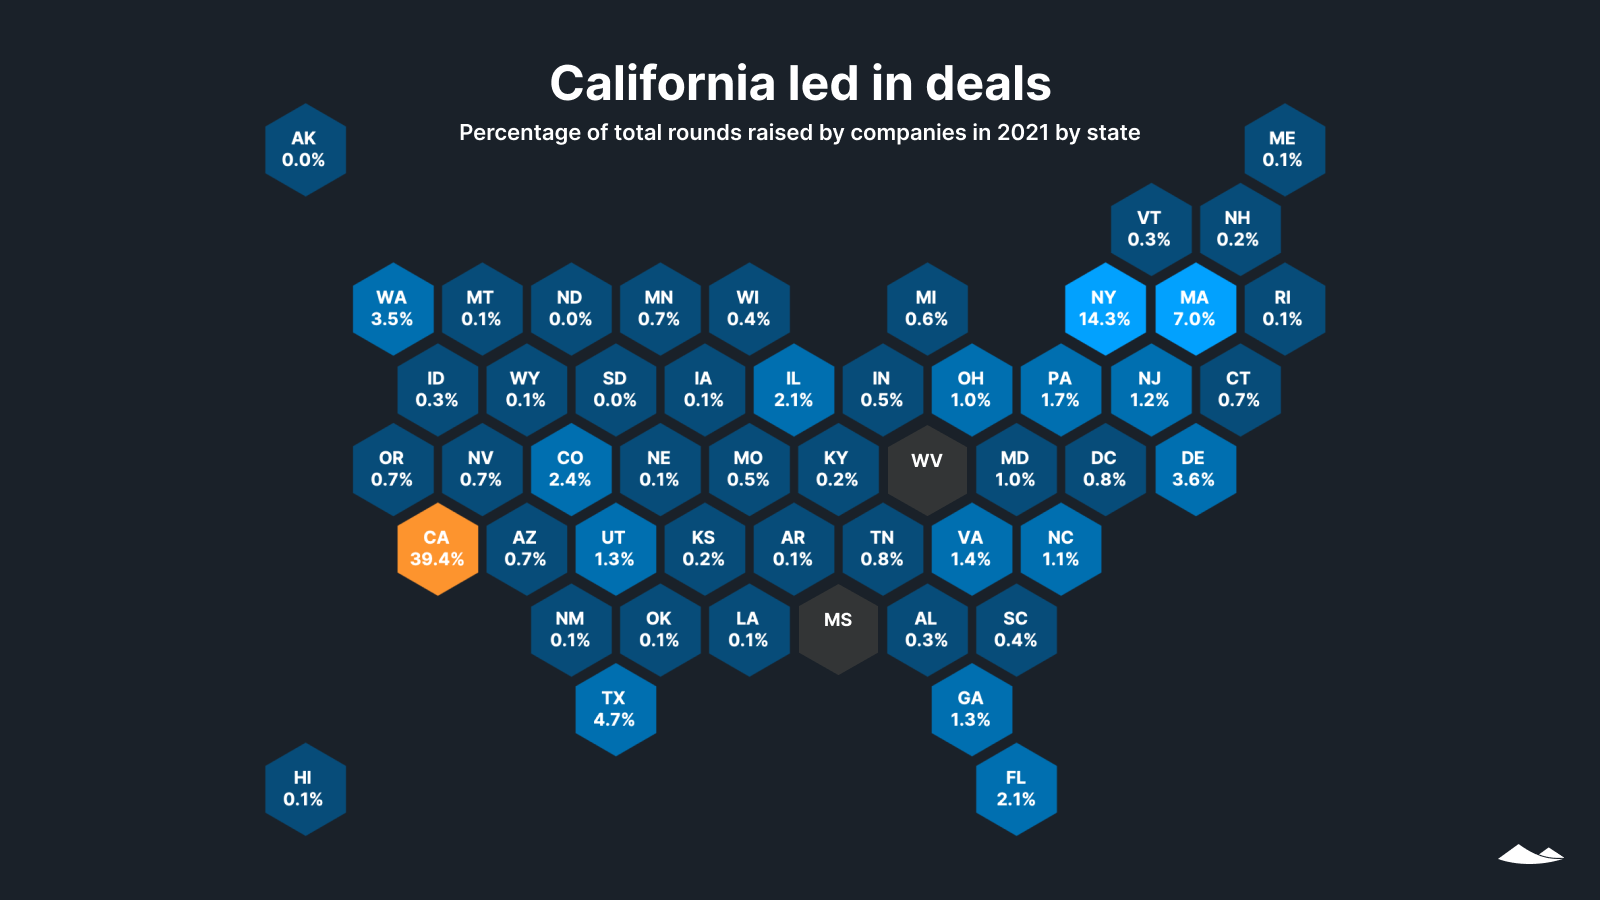 California led in deals: Percentage of total rounds raised by companies in 2021 by U.S. state